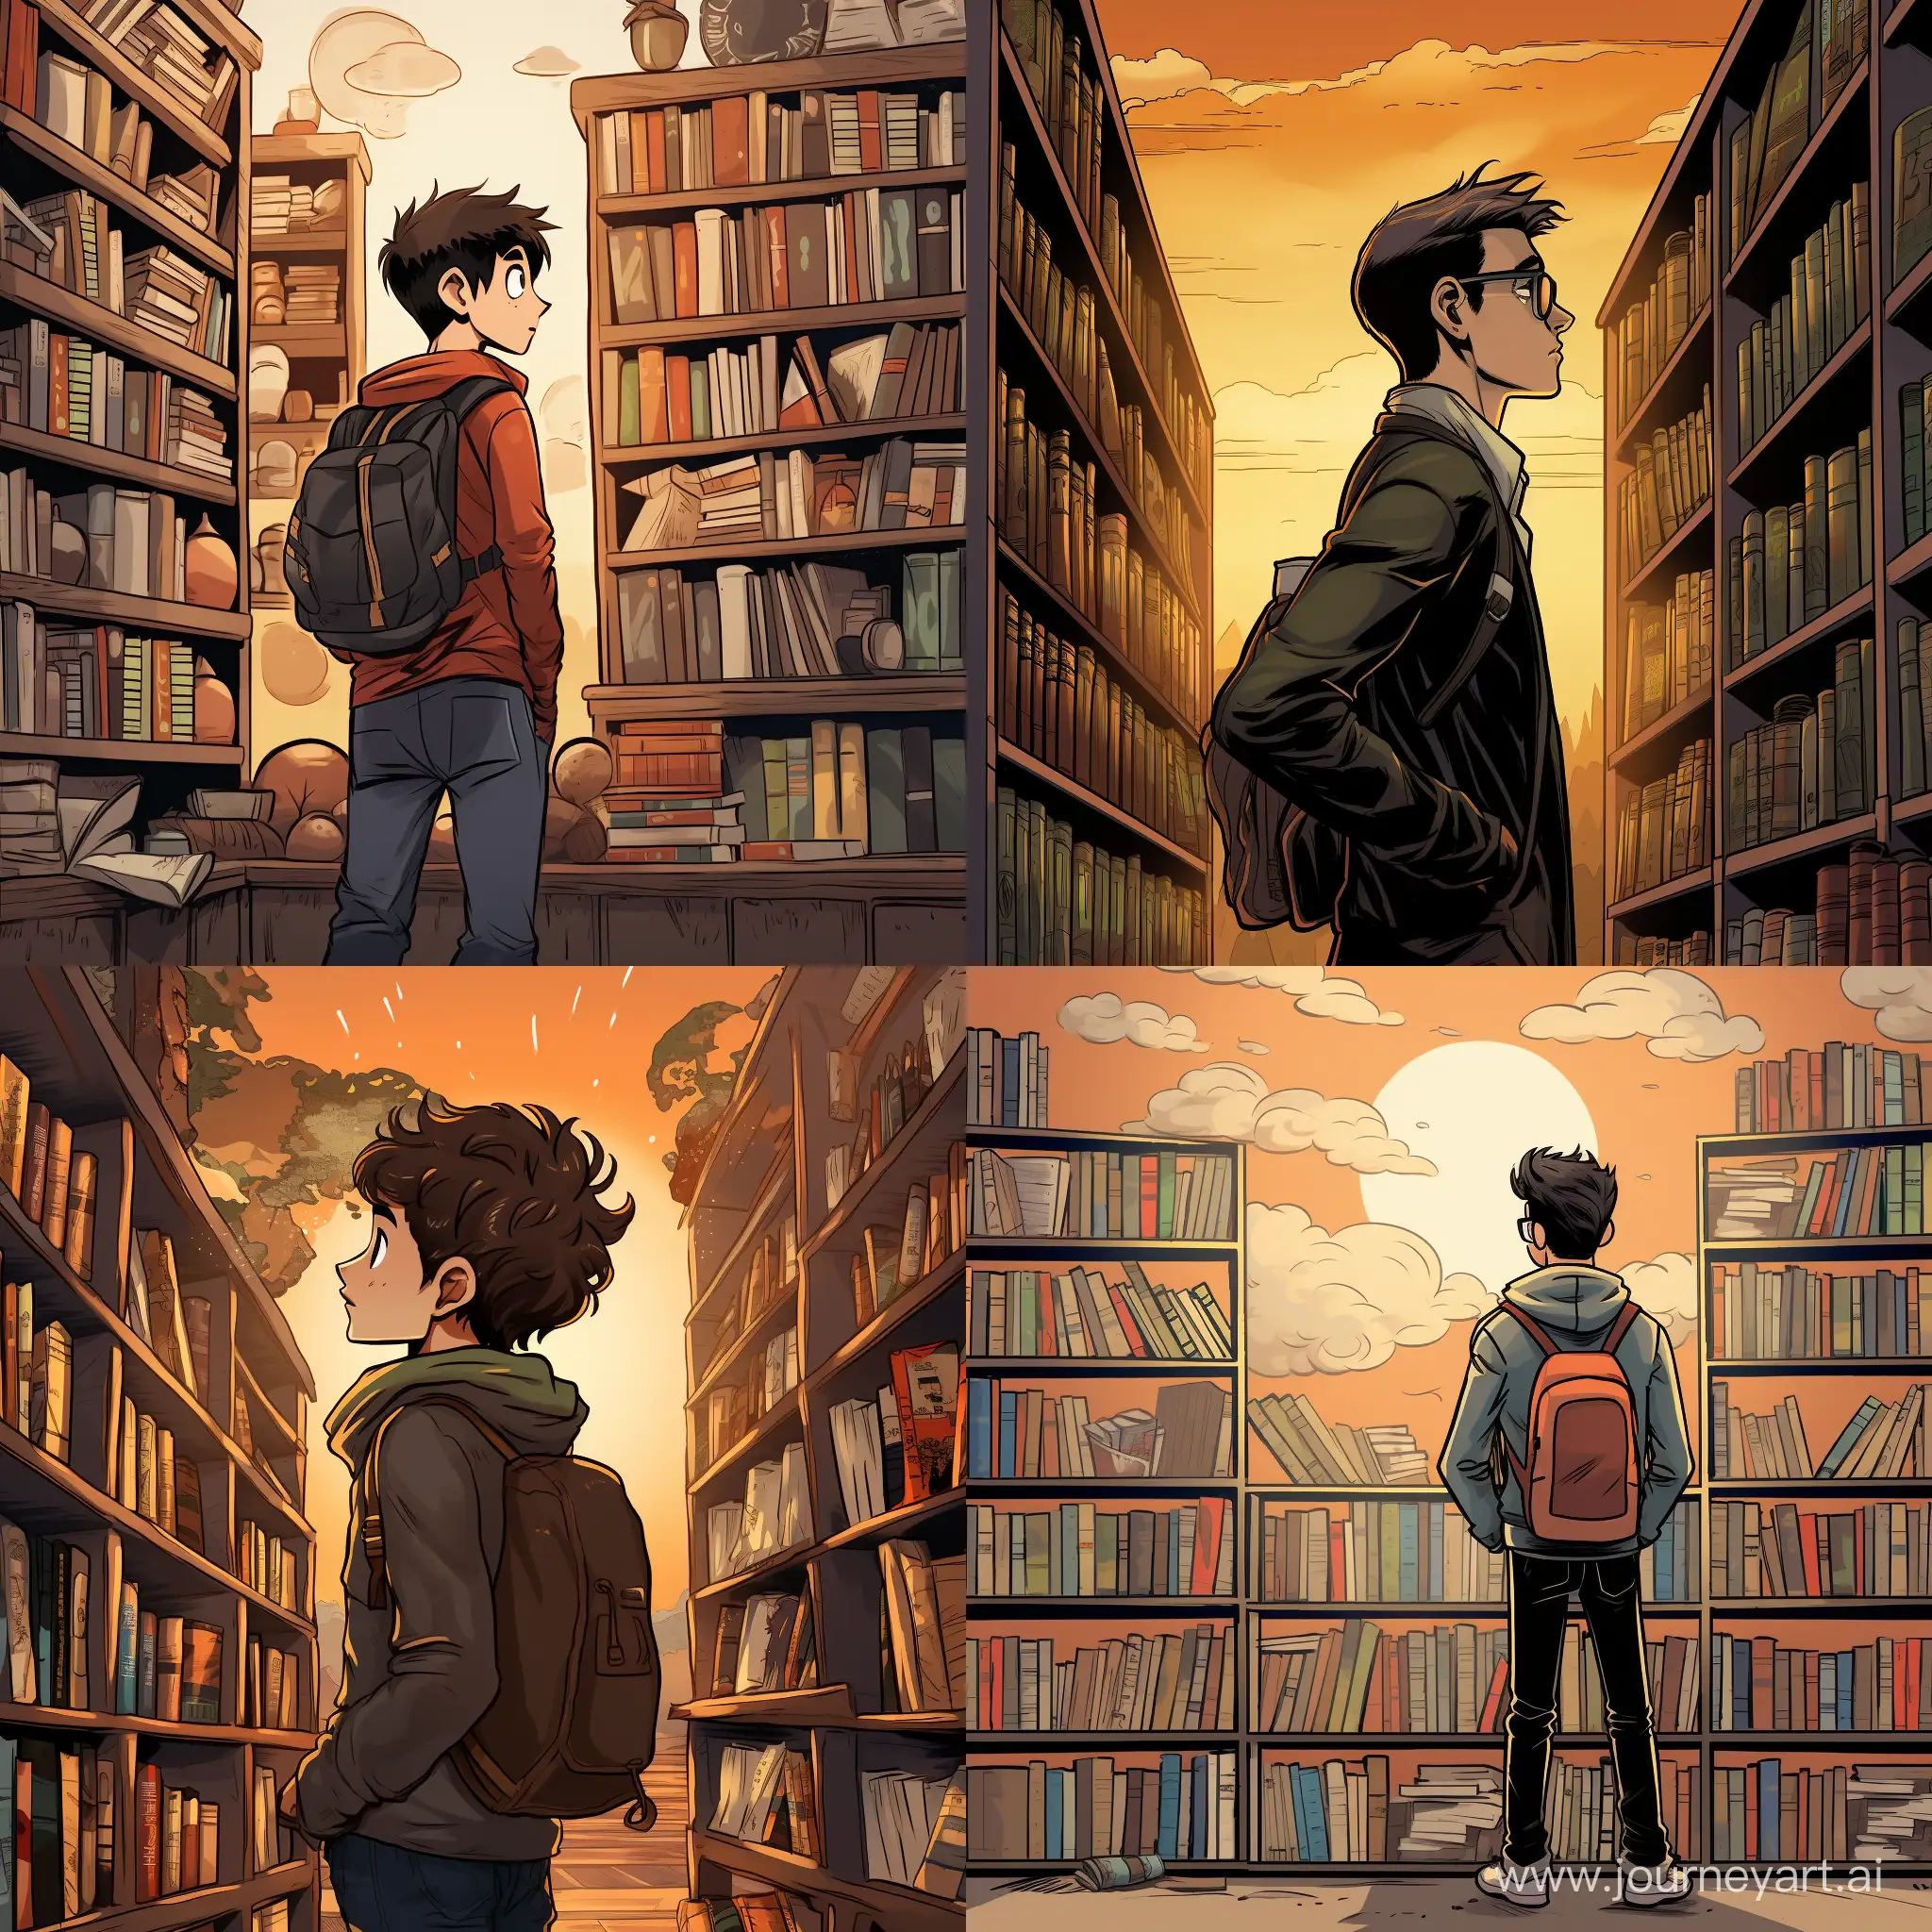 student looking on a shelf full of books in library comic style